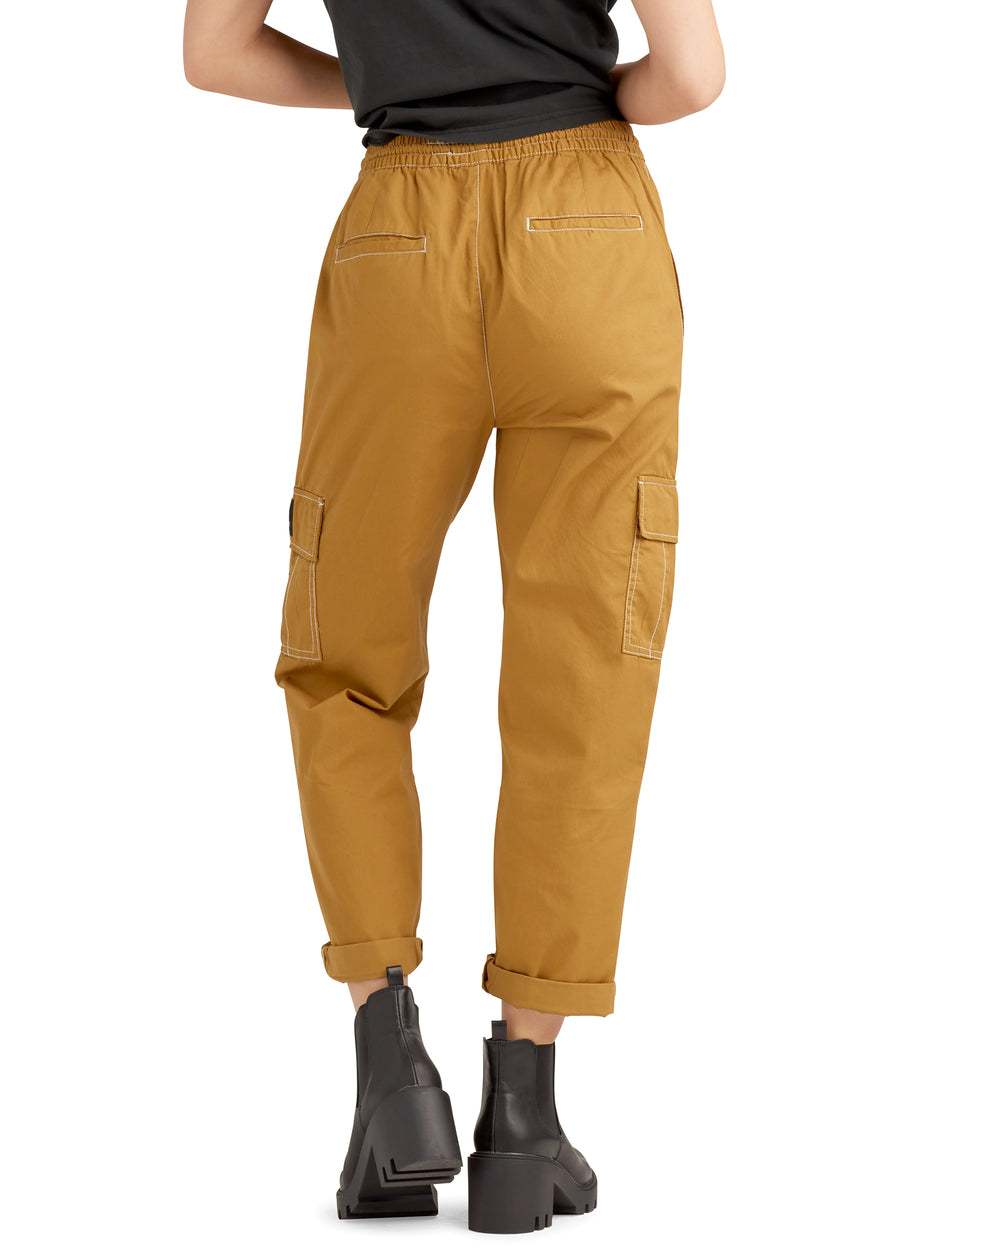 Cameila Mid-Rise Cargo Pants - Sand - Body Glove